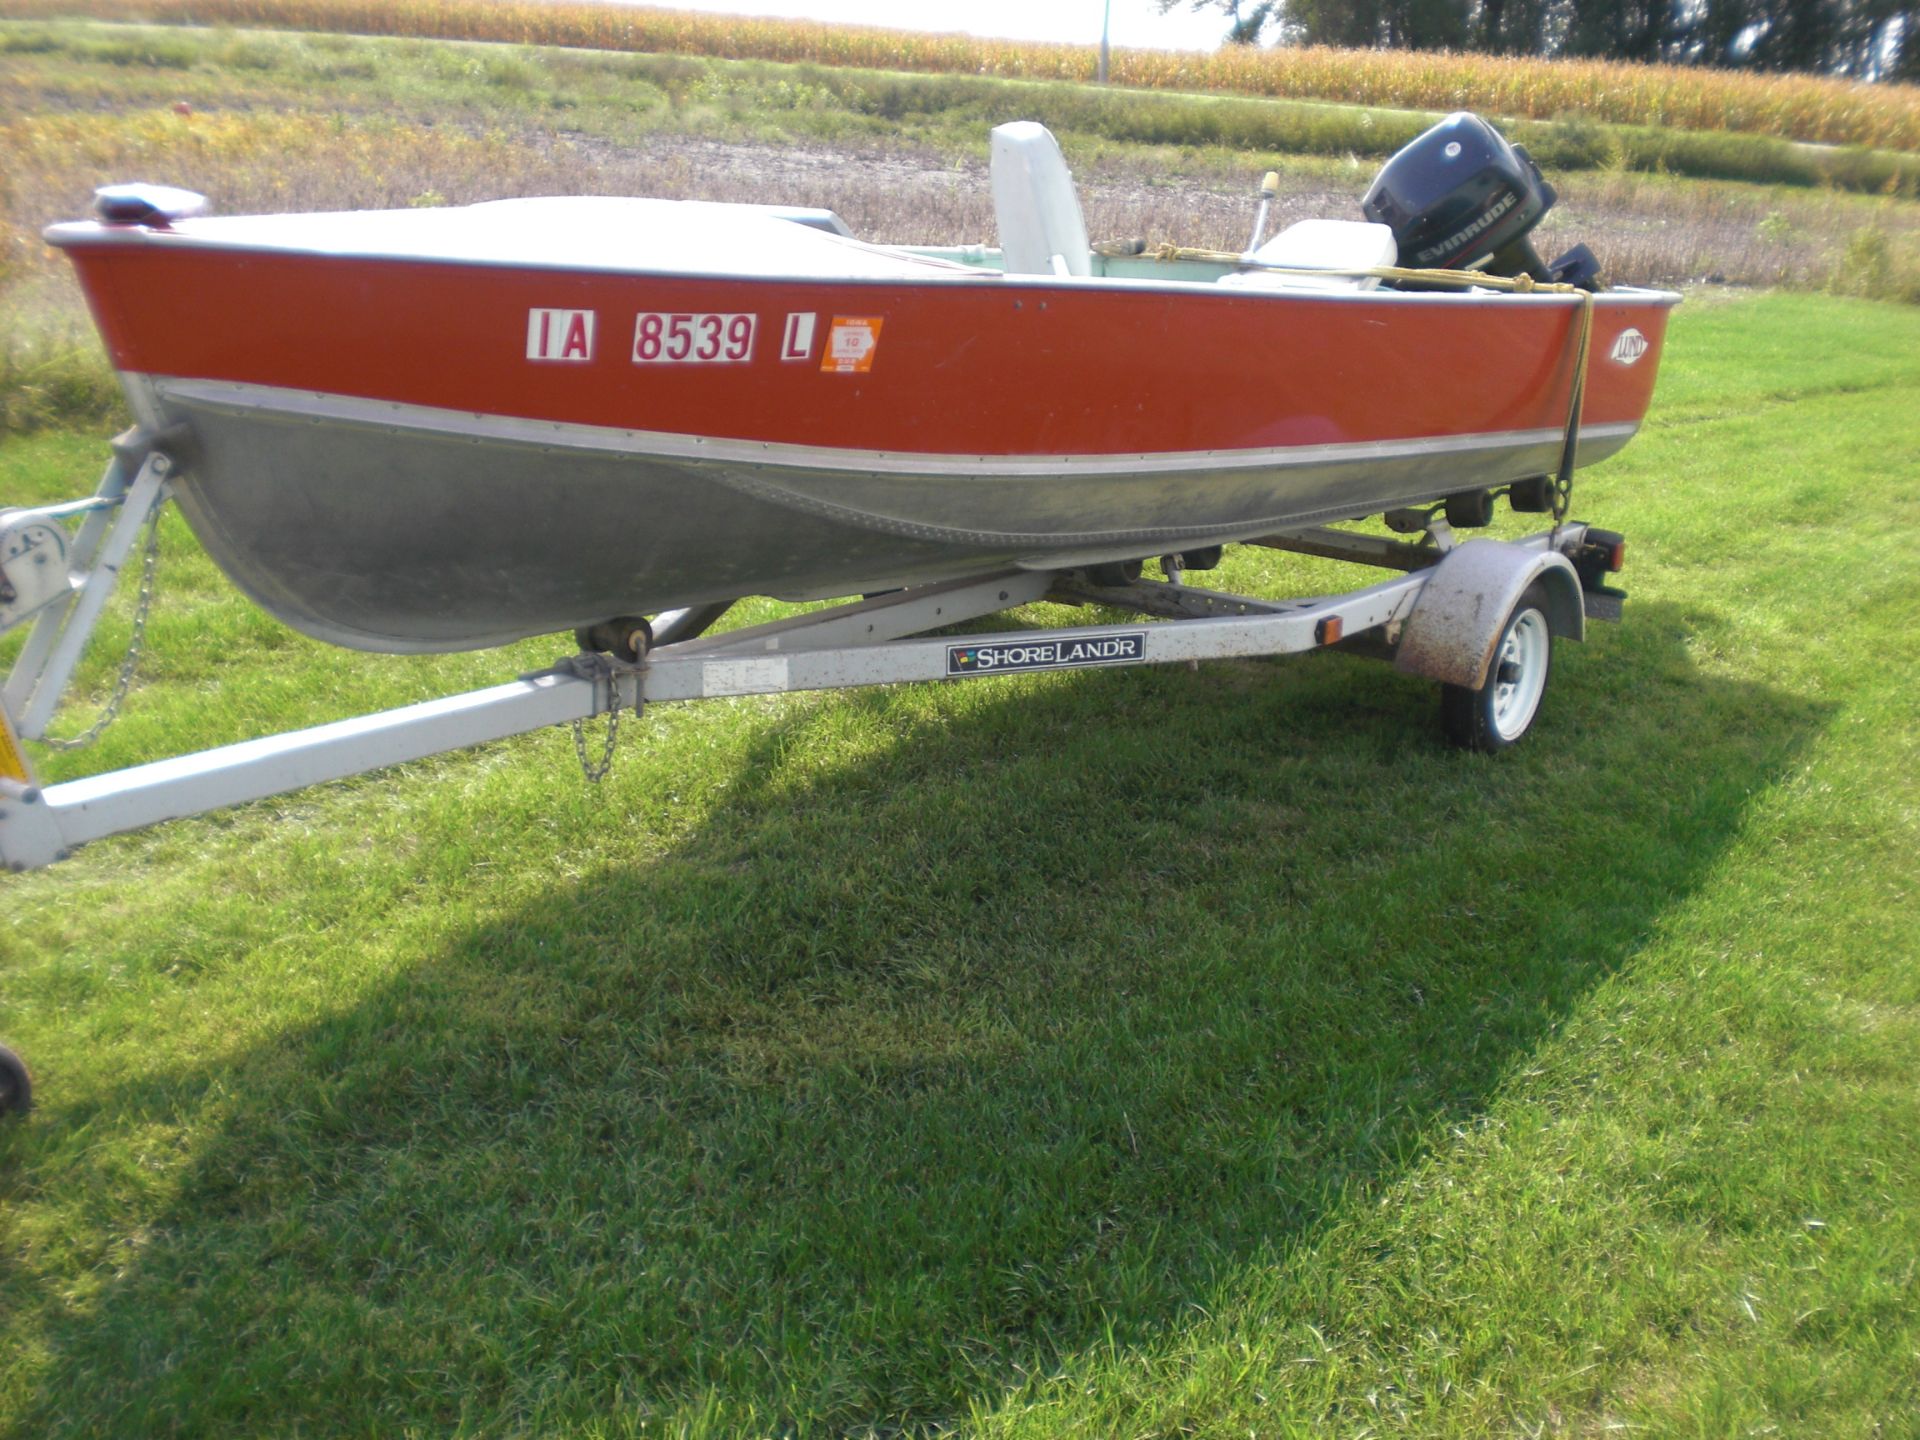 16’ Lund boat w/25 HP 2 cycle oil injected Evinrude motor on Shore Lander trailer.